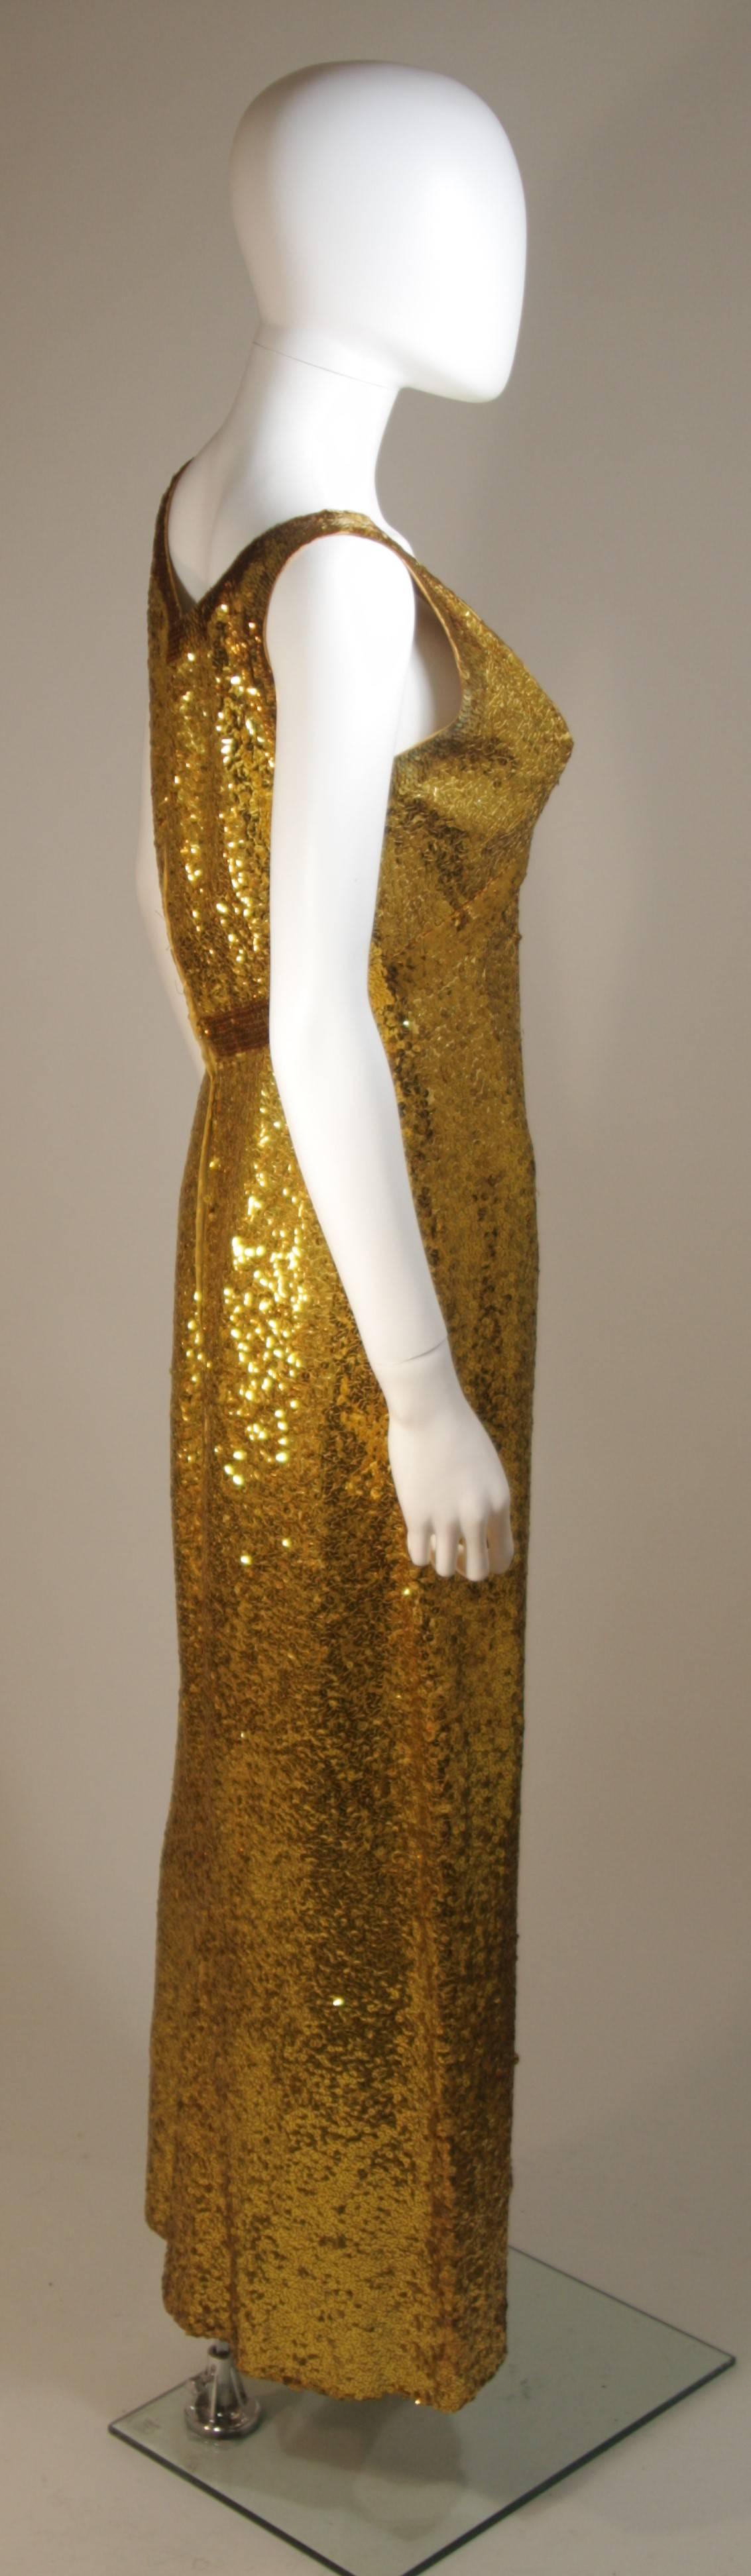 IRENE SARGENT Gold Sequin Gown with Empire Bust Size 6-8 For Sale 1